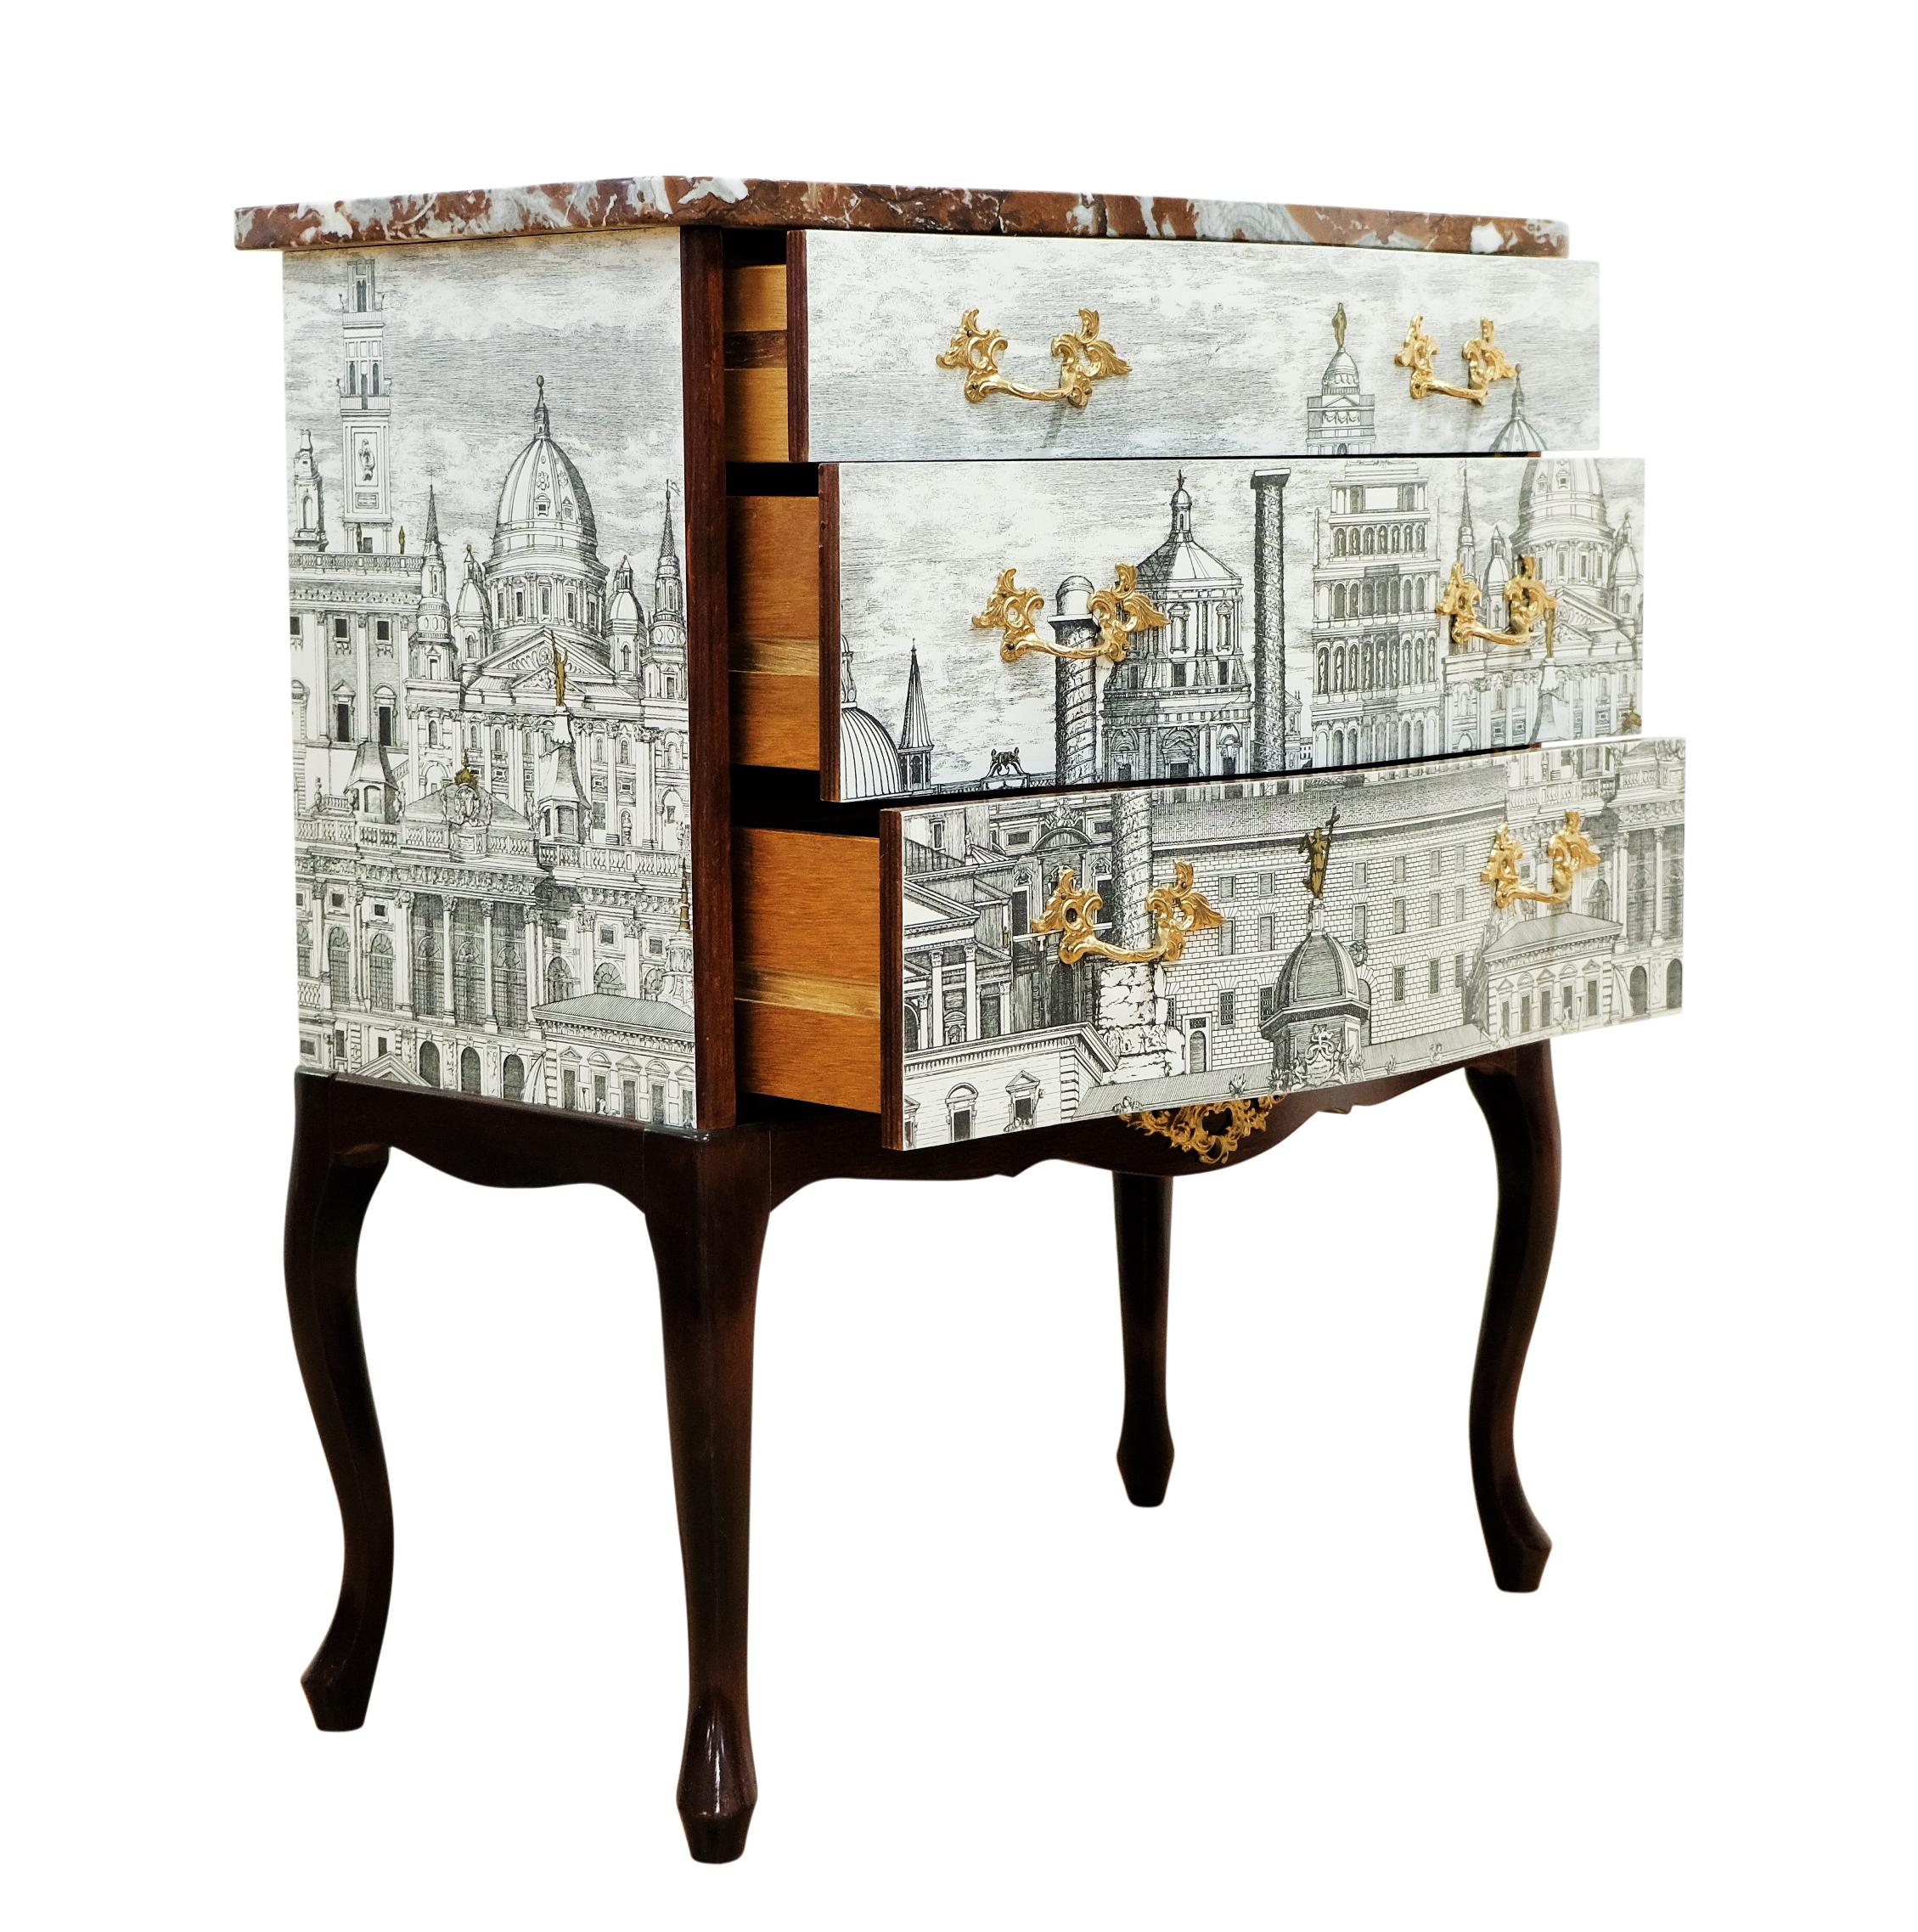 Gustavian chest with Fornasetti Ancient Rome Design and Natural Marble Top. Original cast brass fittings to the drawers and legs. 

Width: 66cm / 26.0